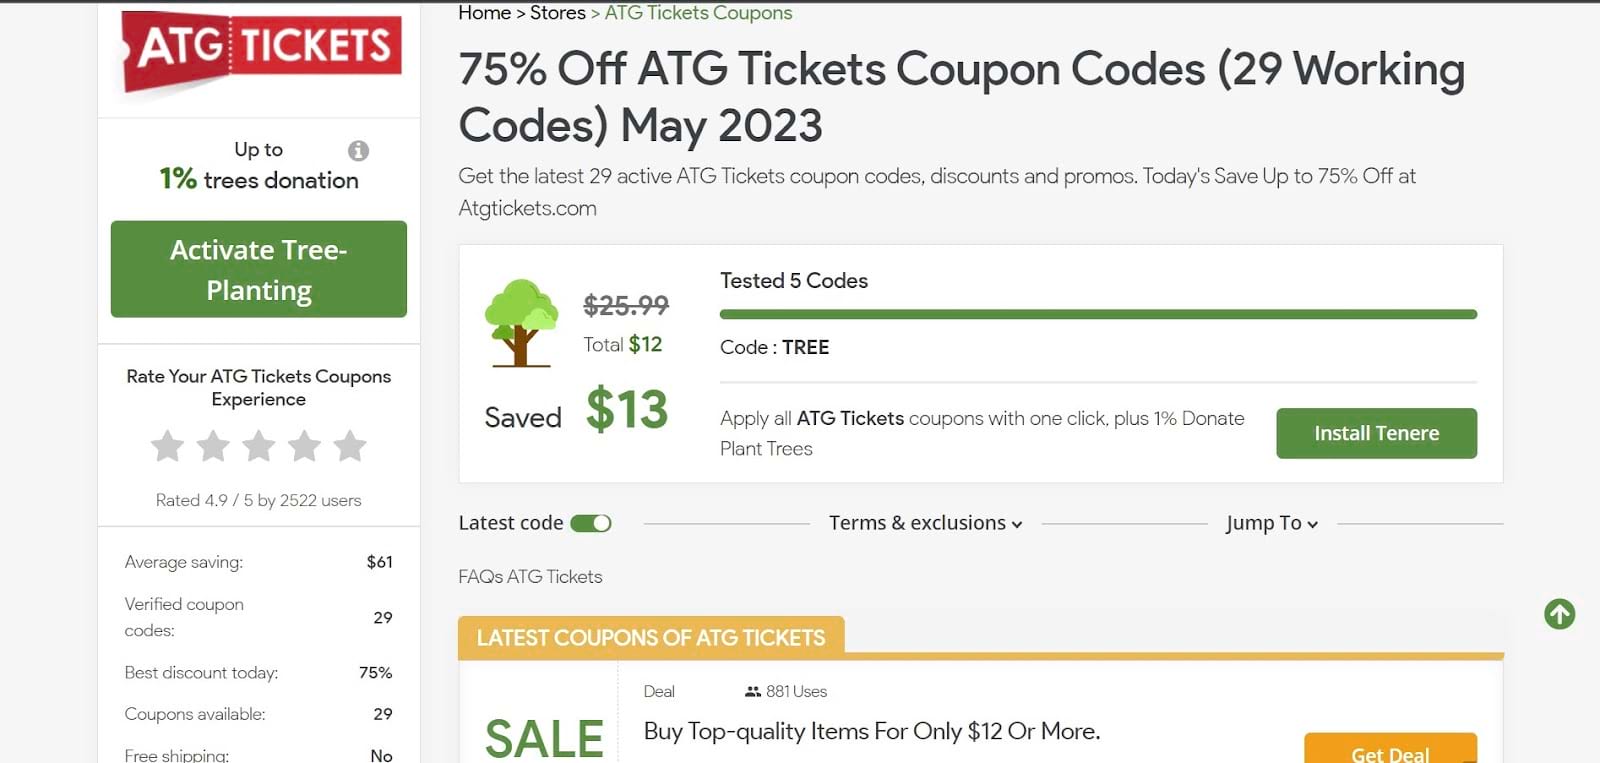 How To Use ATG Tickets Discount Code 3